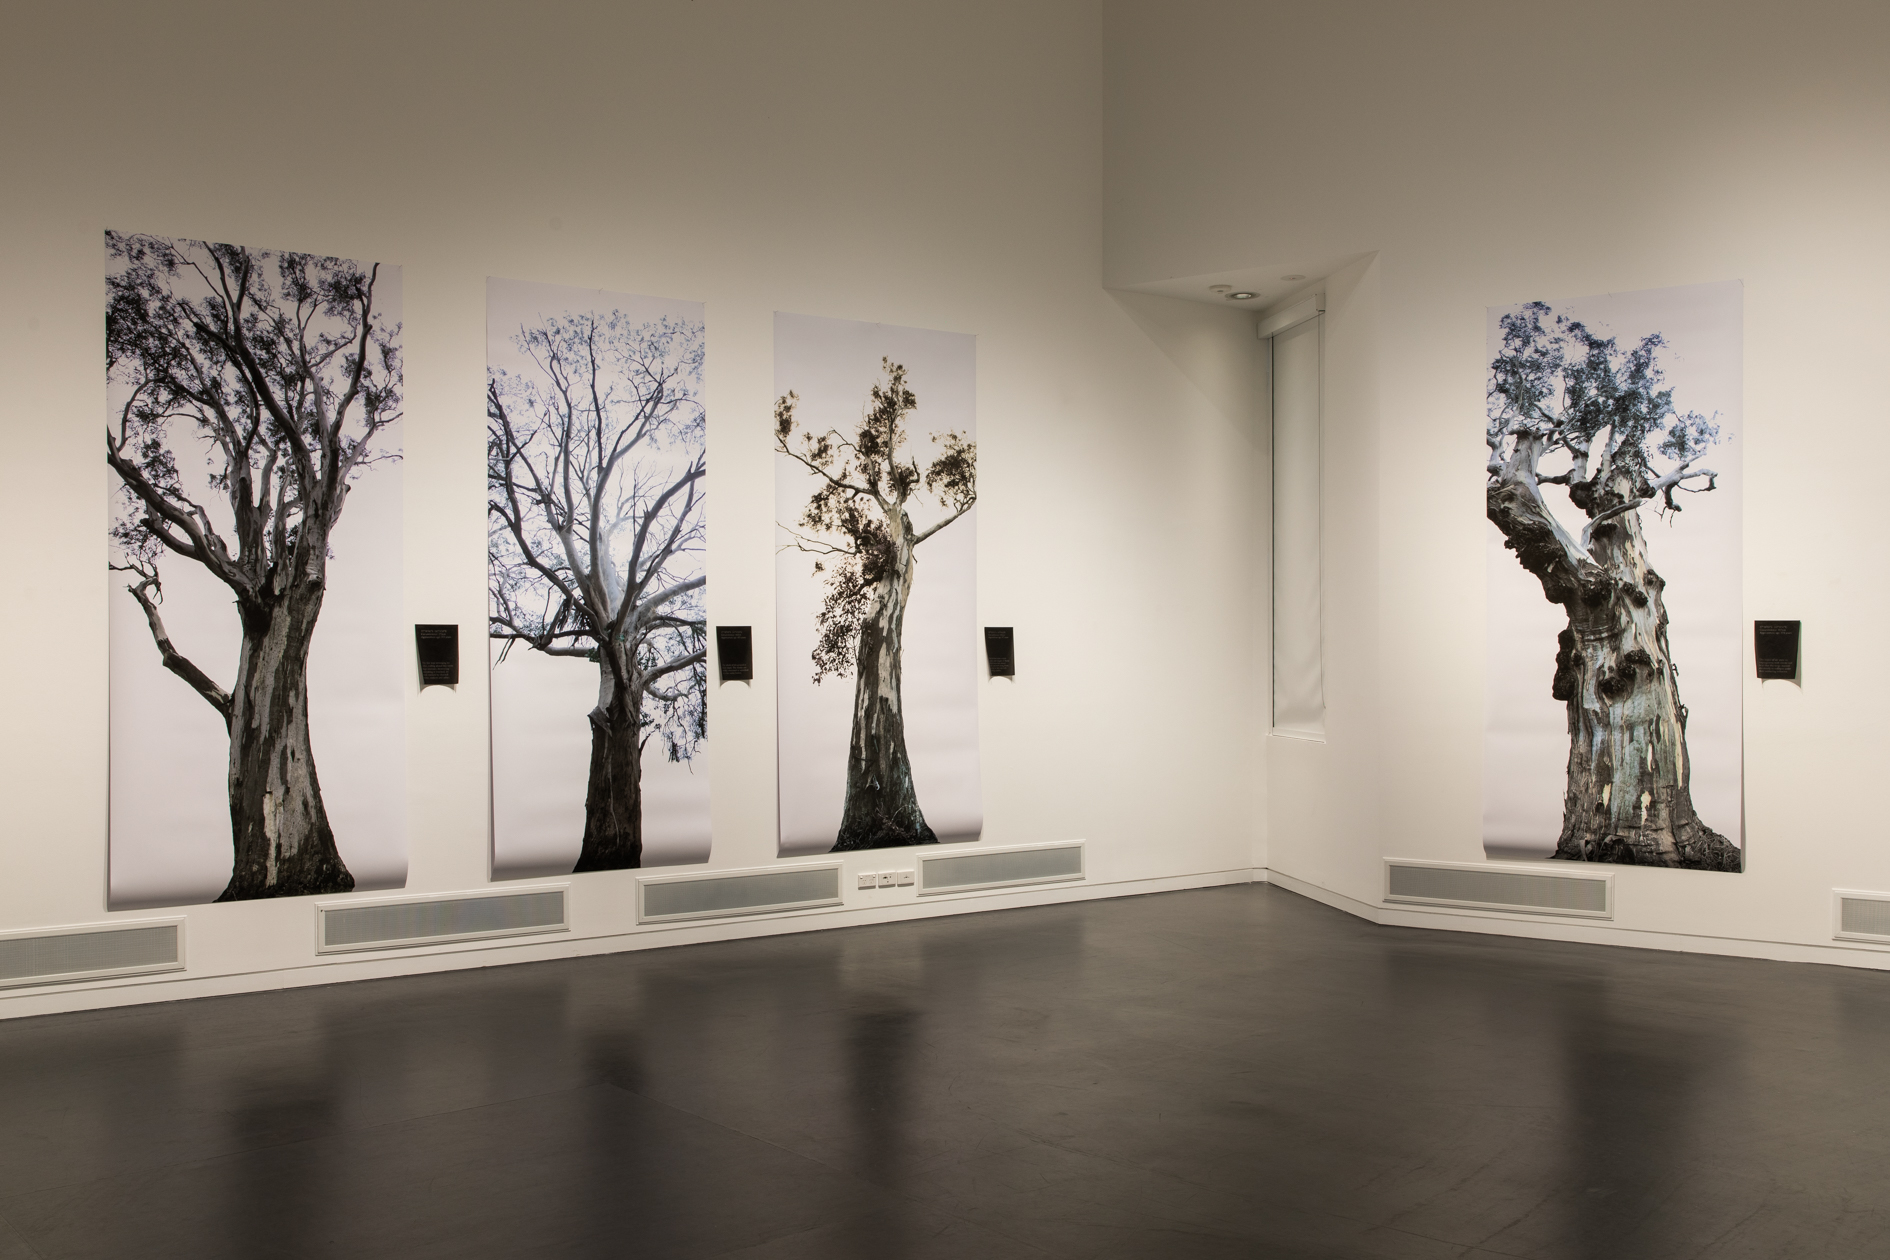 Four large-scale black and white photographs of gum trees on the white walls of a gallery space